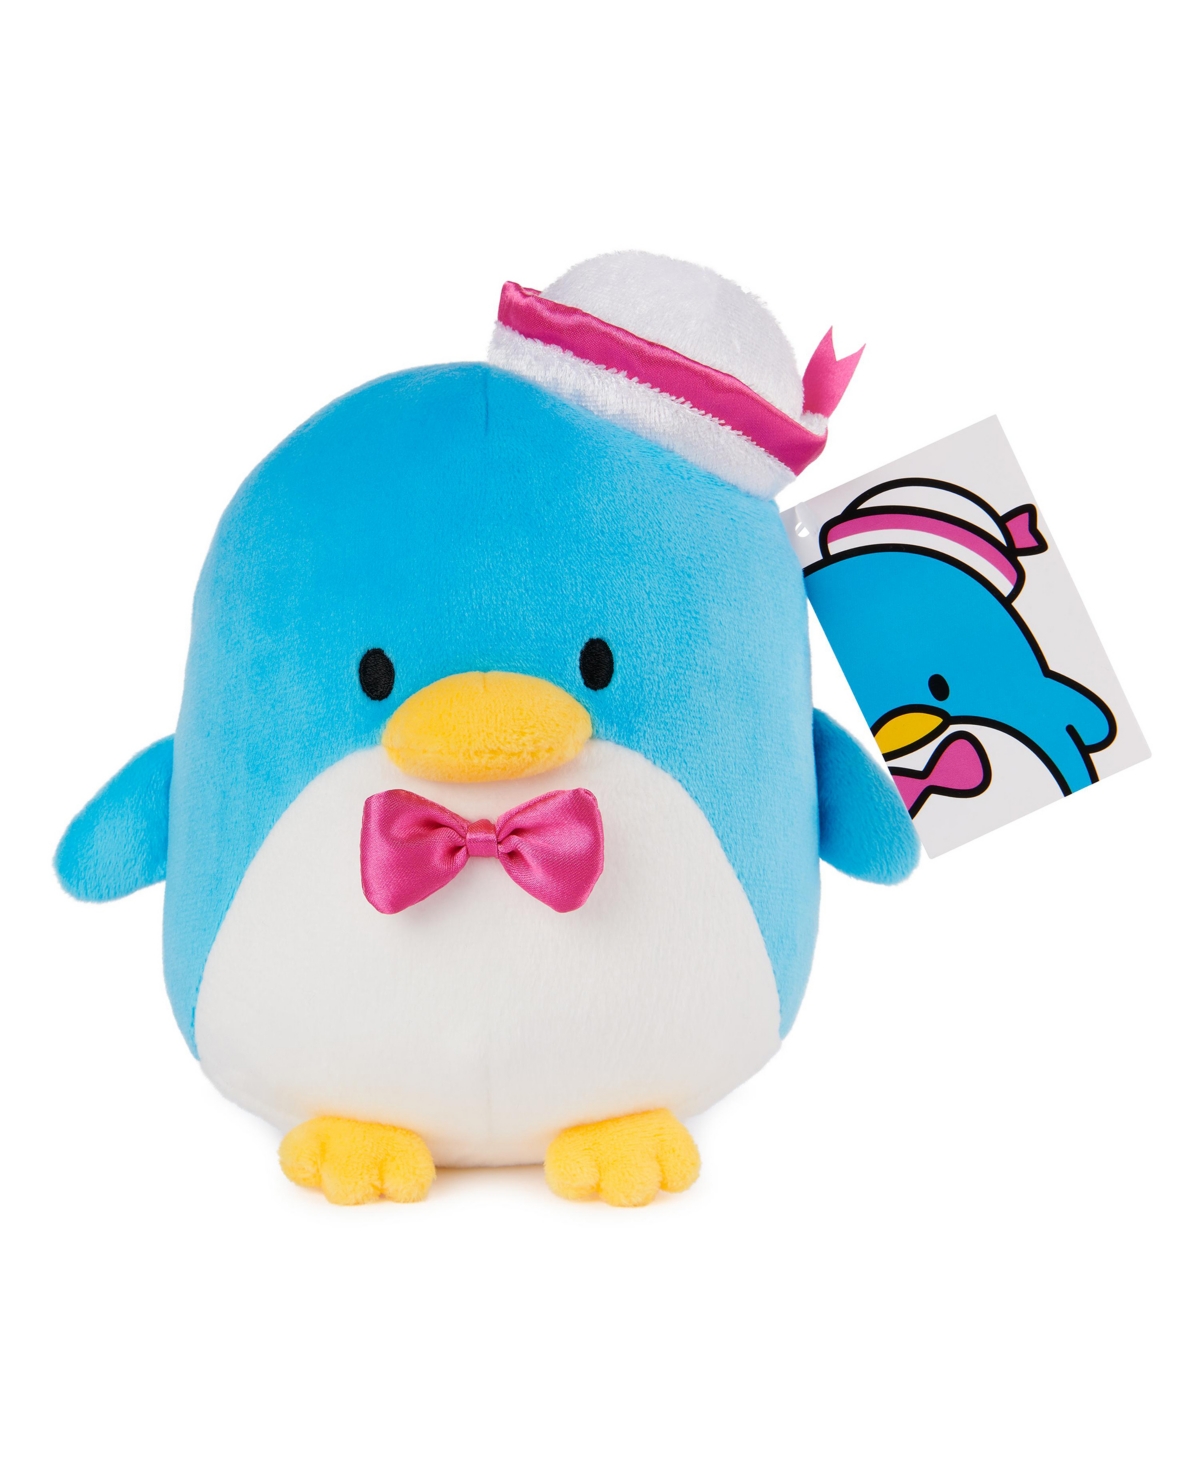 Hello Kitty Gund Sanrio Tuxedo Sam Plush, Penguin Stuffed Animal, For Ages 3 And Up, 6.5" In Multi-color